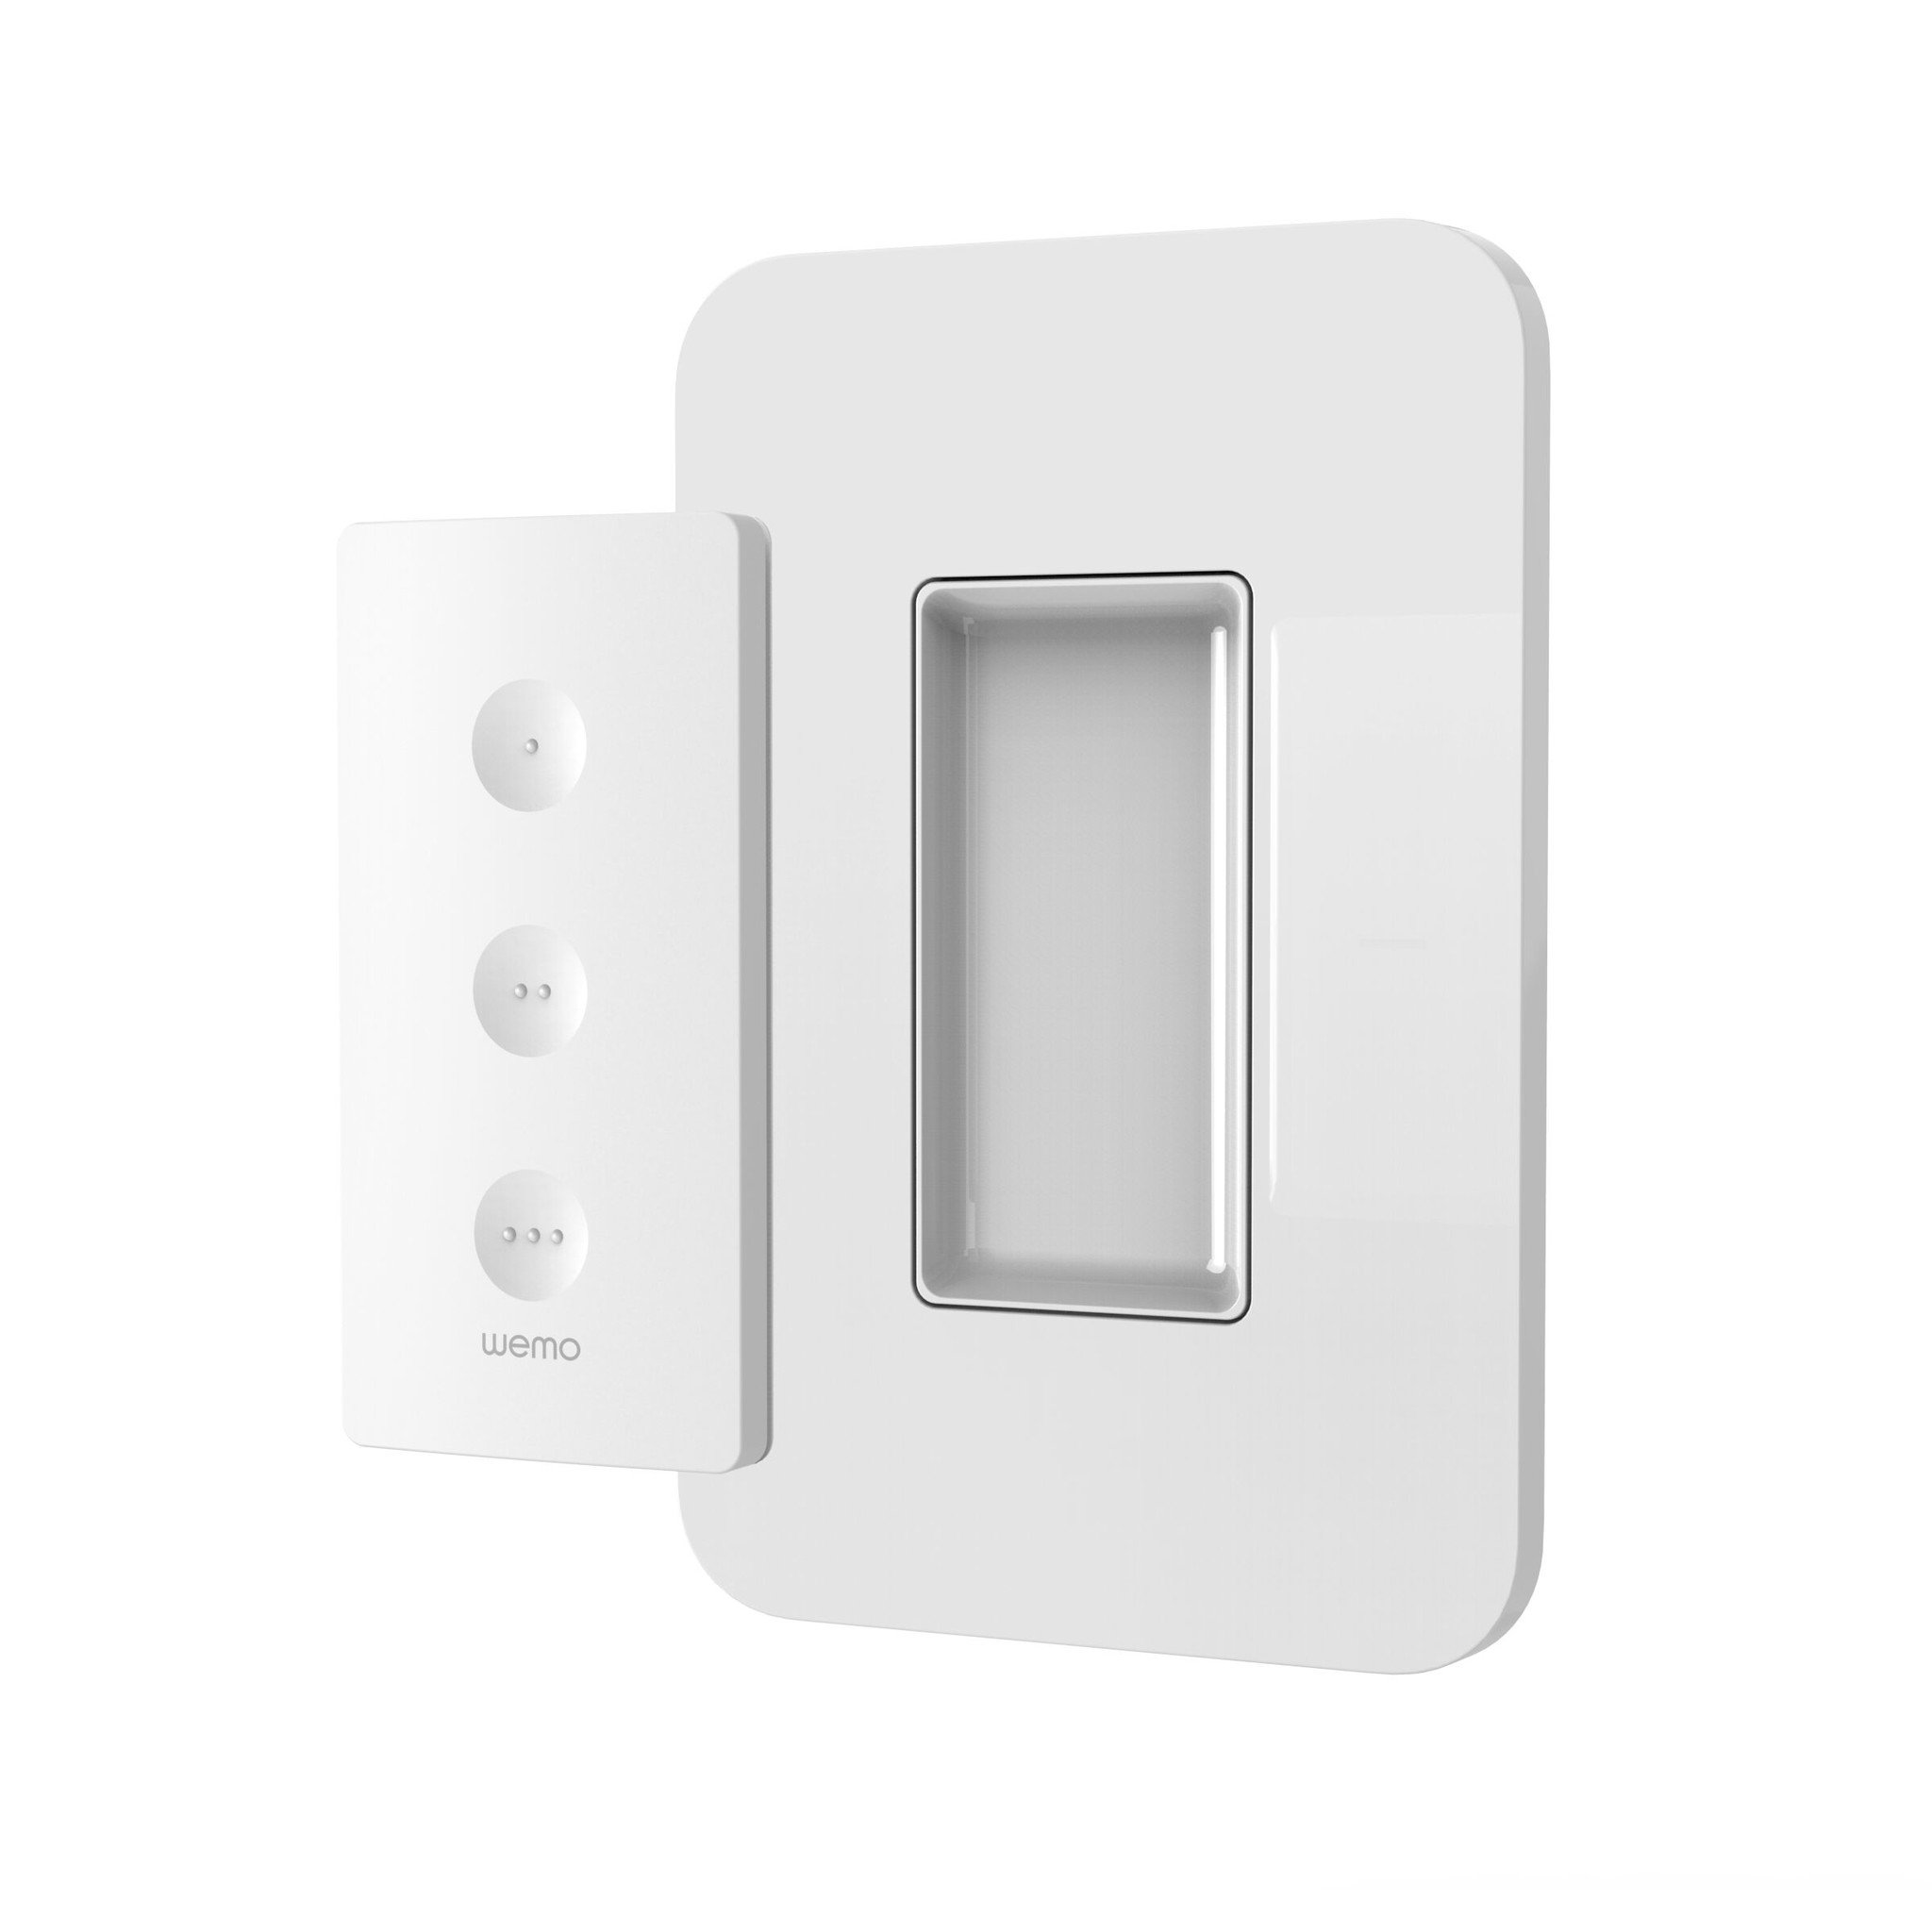 Wemo Stage remote detached from wall plate